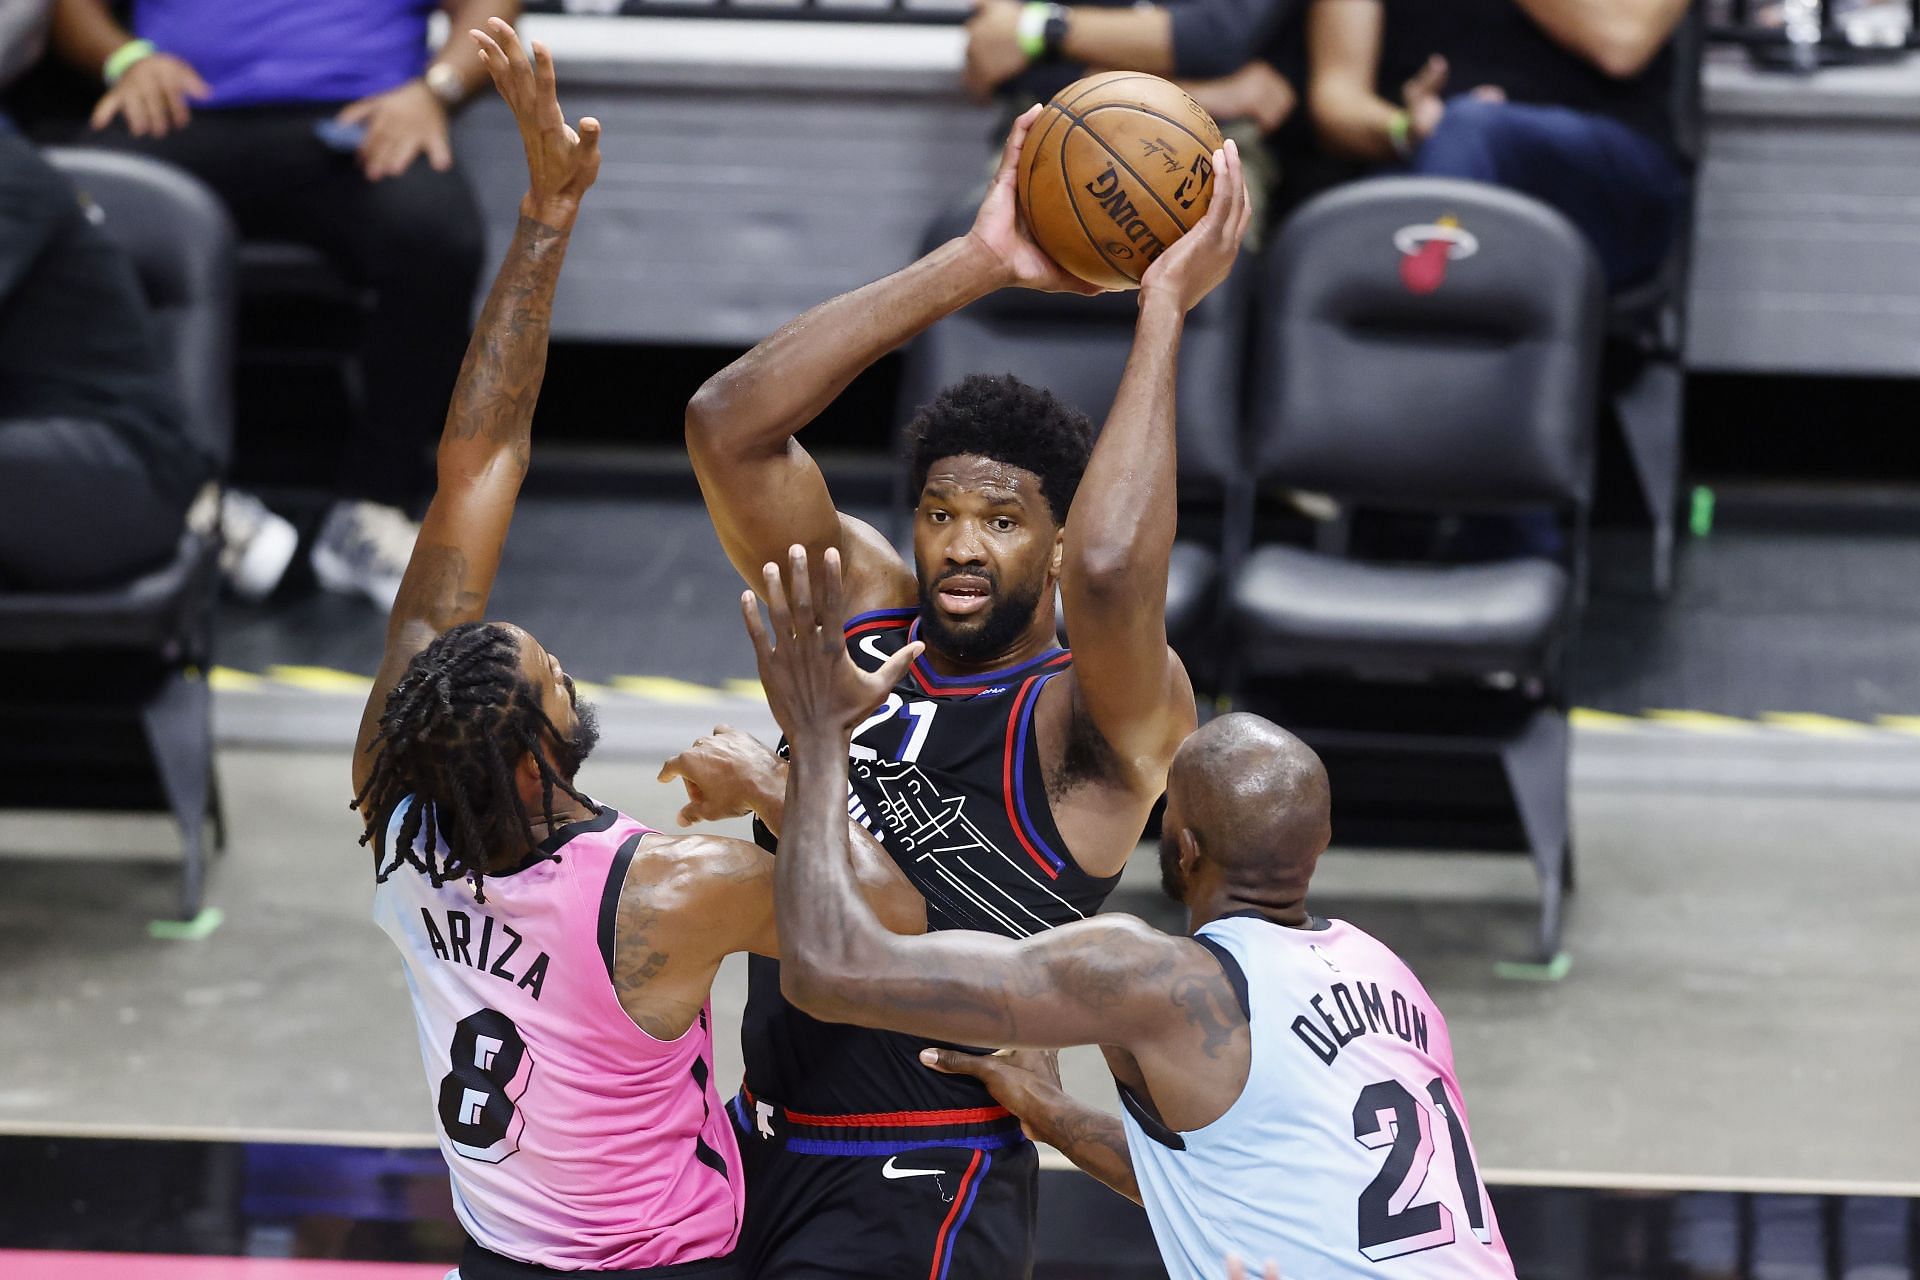 Joel Embiid #21 of the Philadelphia 76ers is defended by Trevor Ariza #8 and Dewayne Dedmon #21 of the Miami Heat during the first quarter at American Airlines Arena on May 13, 2021 in Miami, Florida.